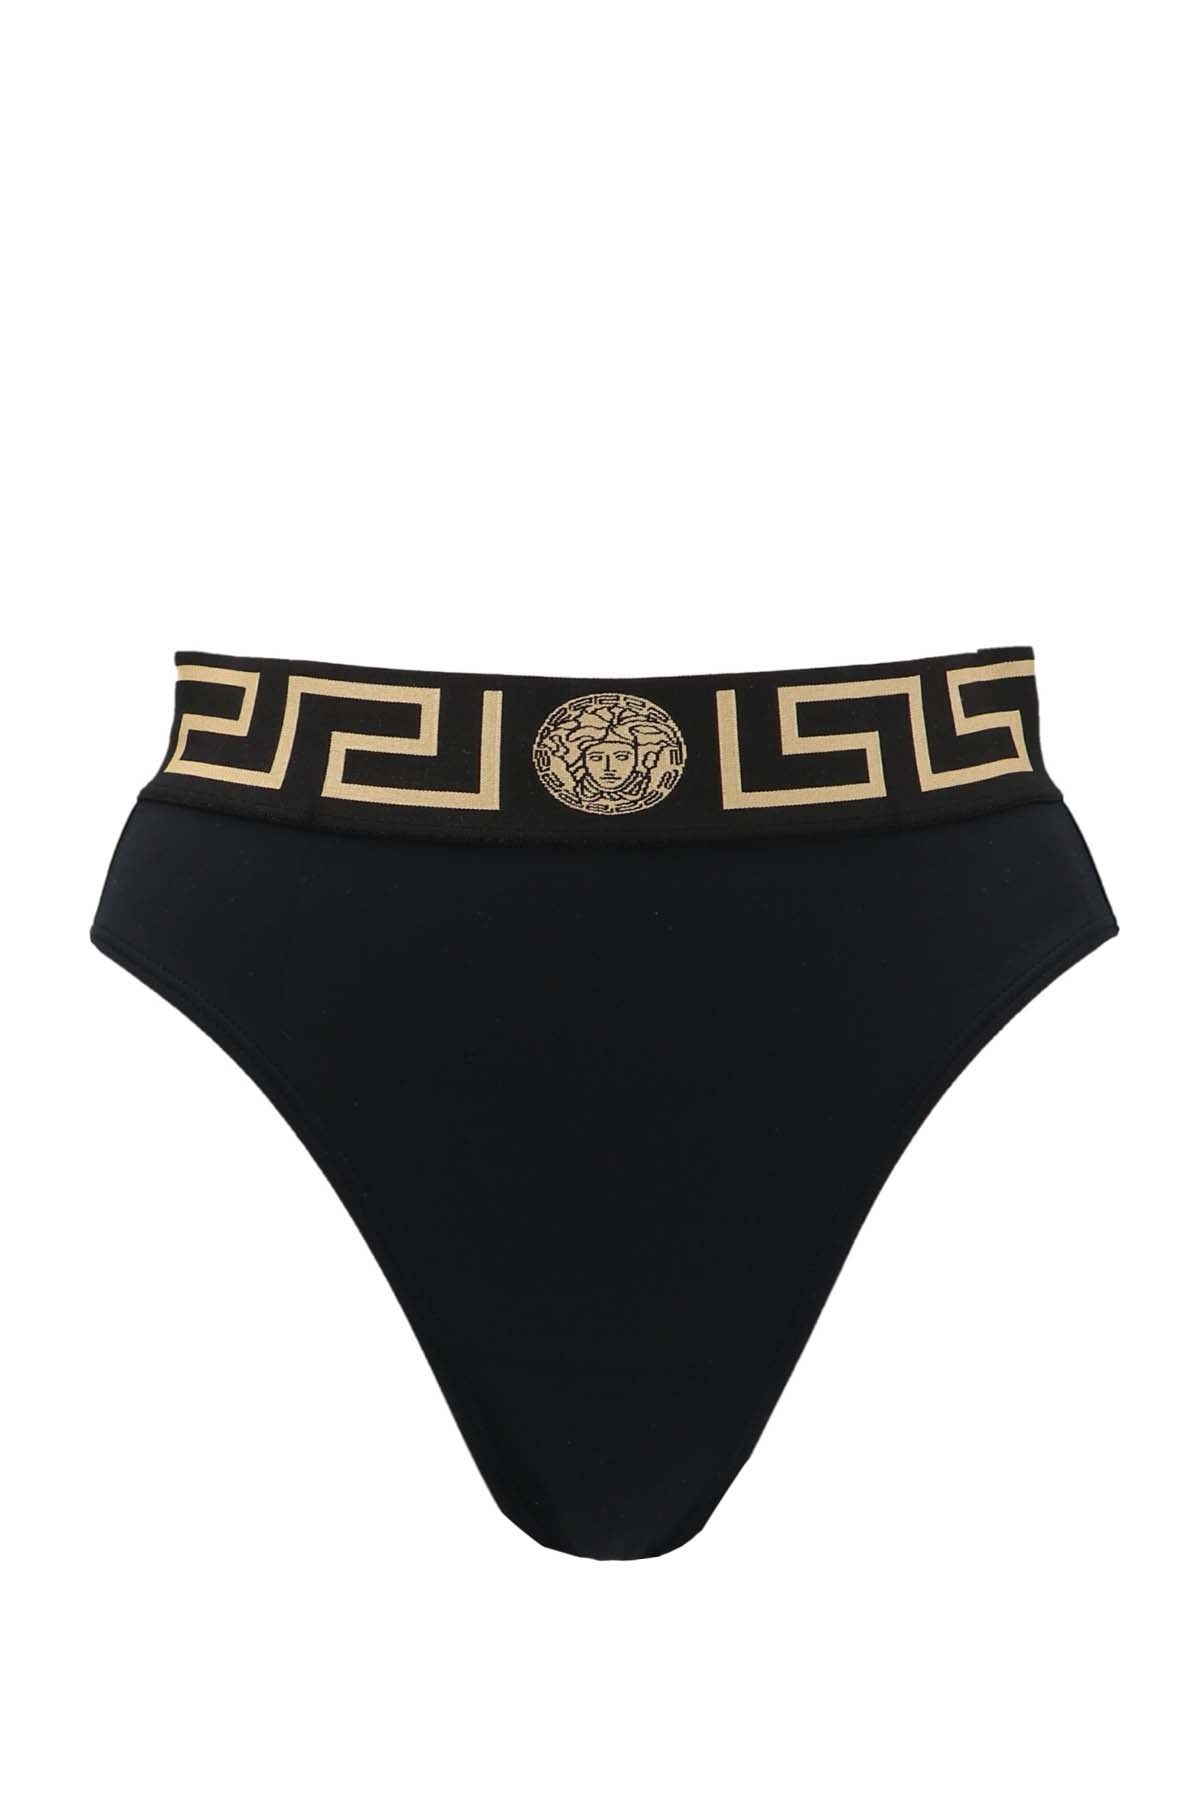 VERSACE Badehose Mit Hoher Taille